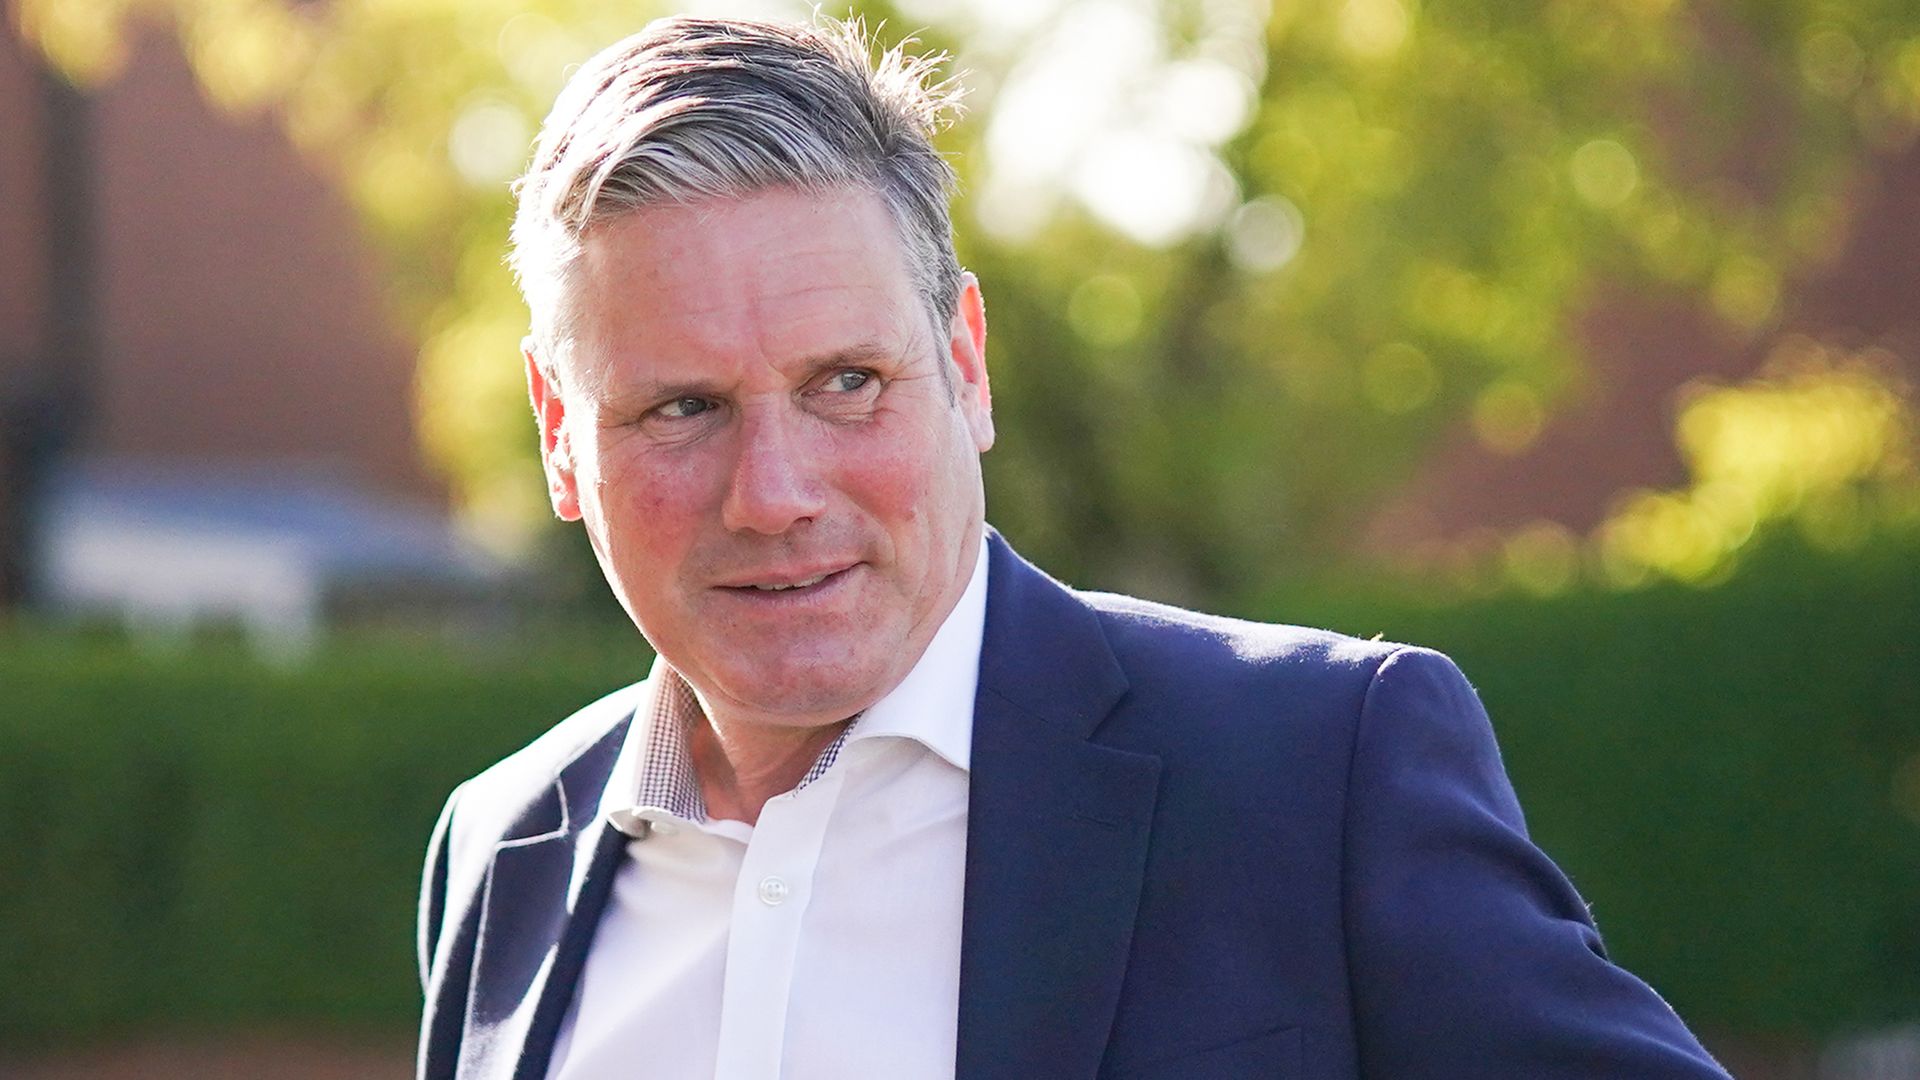 Keir Starmer is under pressure from Labour activists to make electoral reform a manifesto commitment - Credit: PA